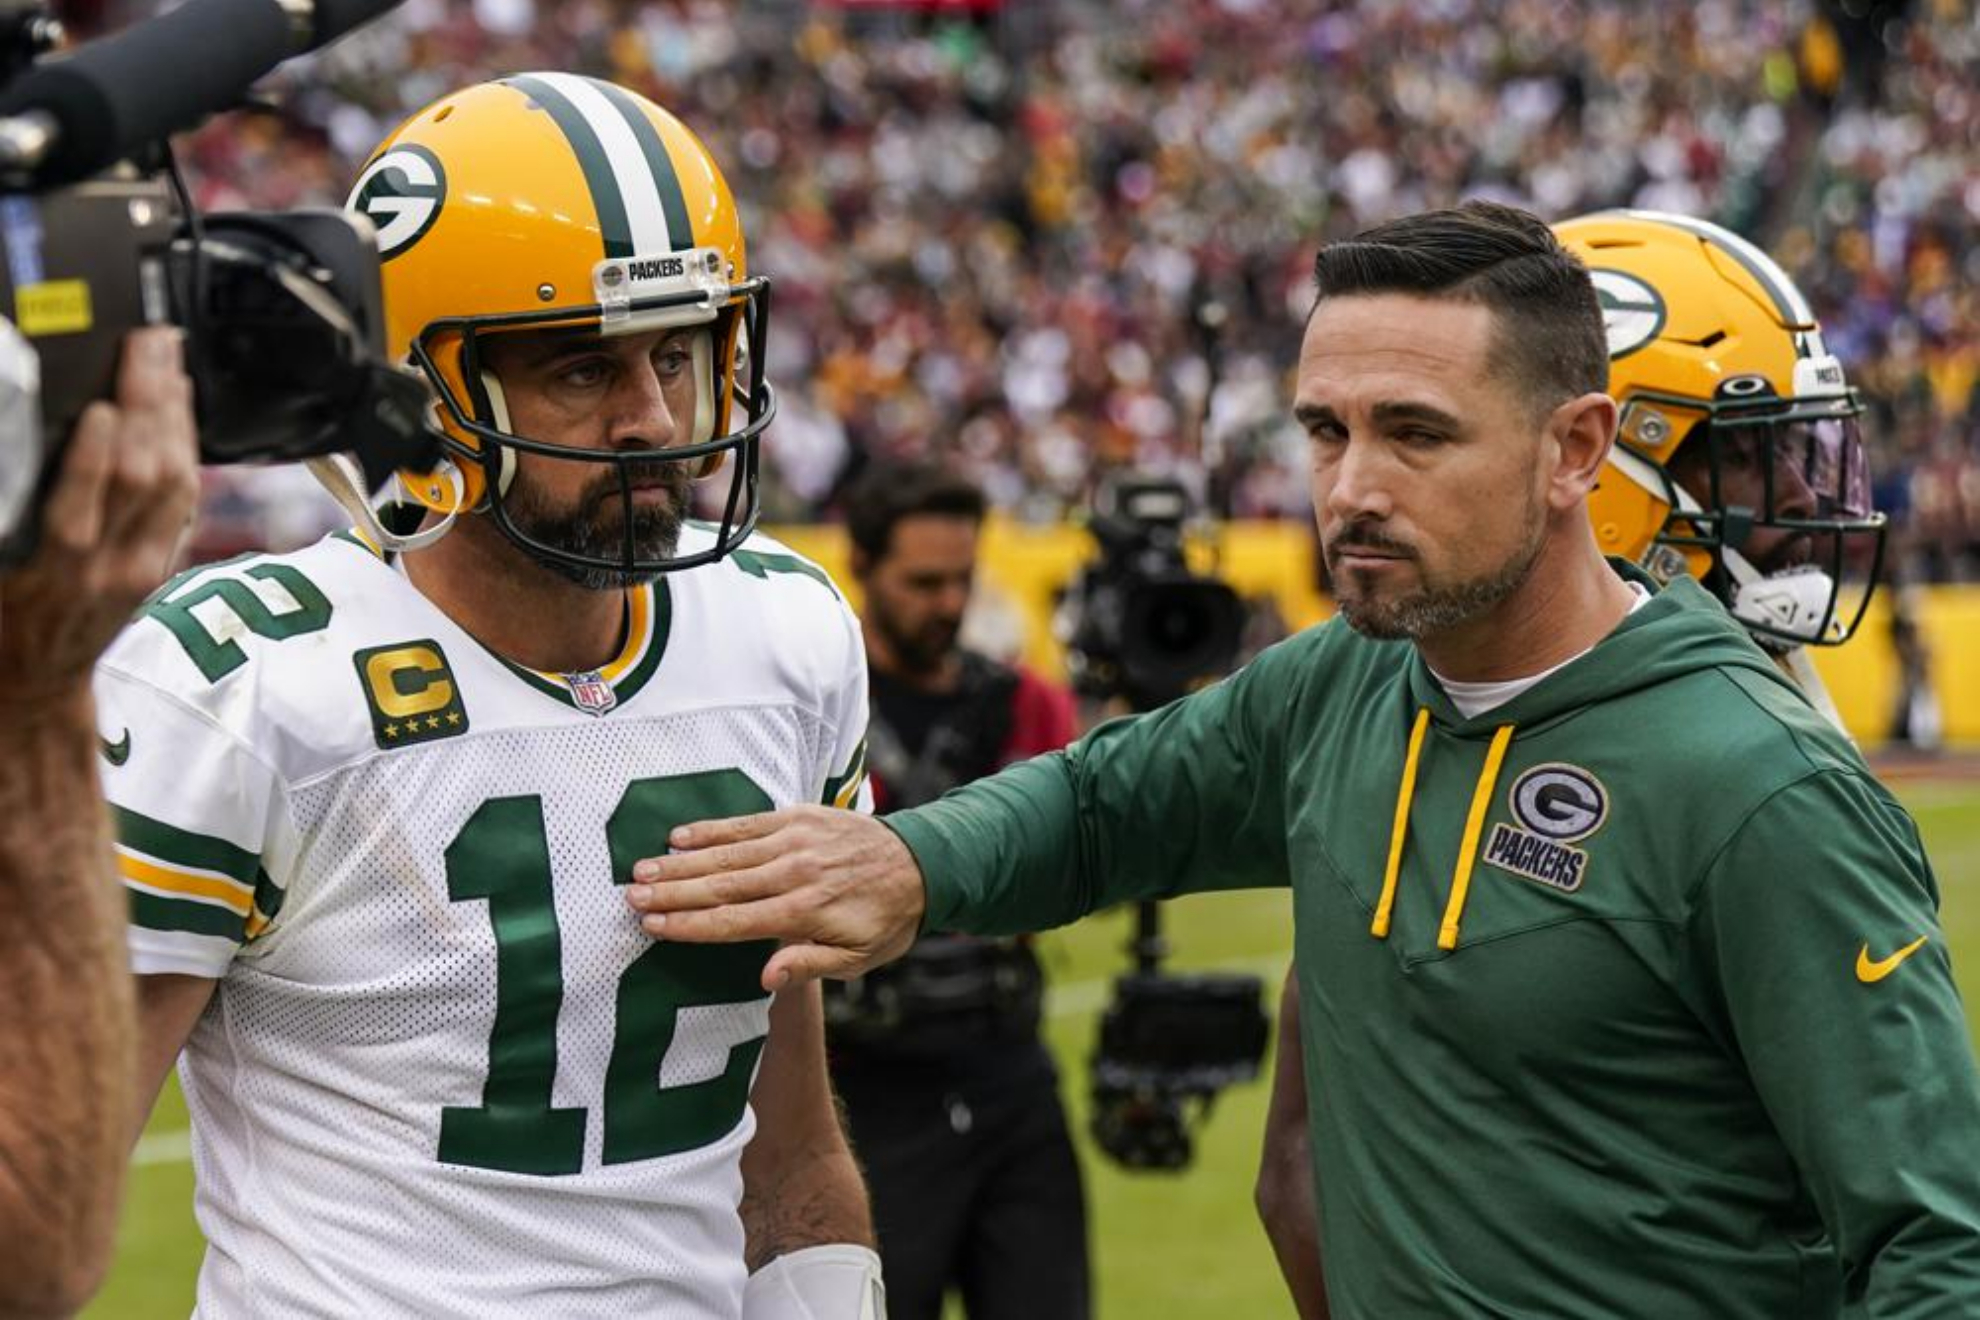 Aaron Rodgers and head coach Matt LaFleur are in constant communication according to the QB.